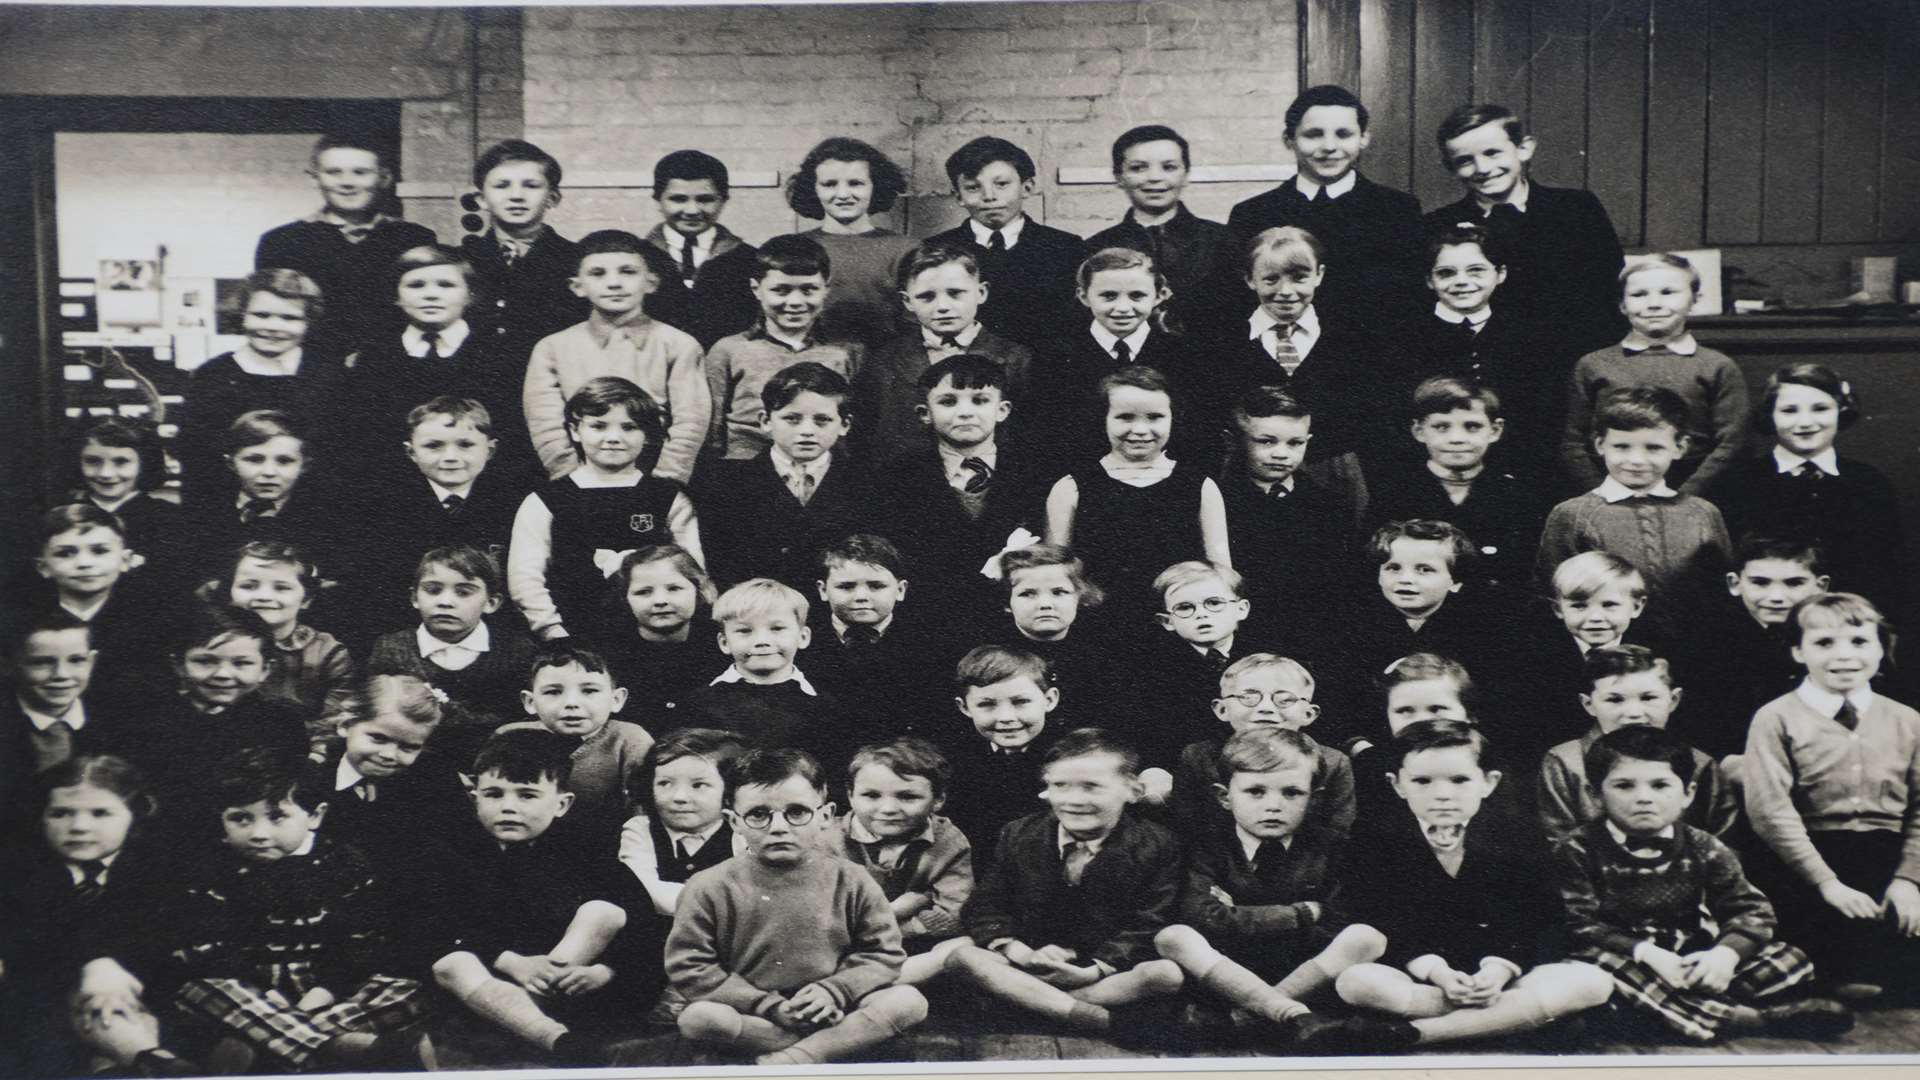 A school photo from 1960.